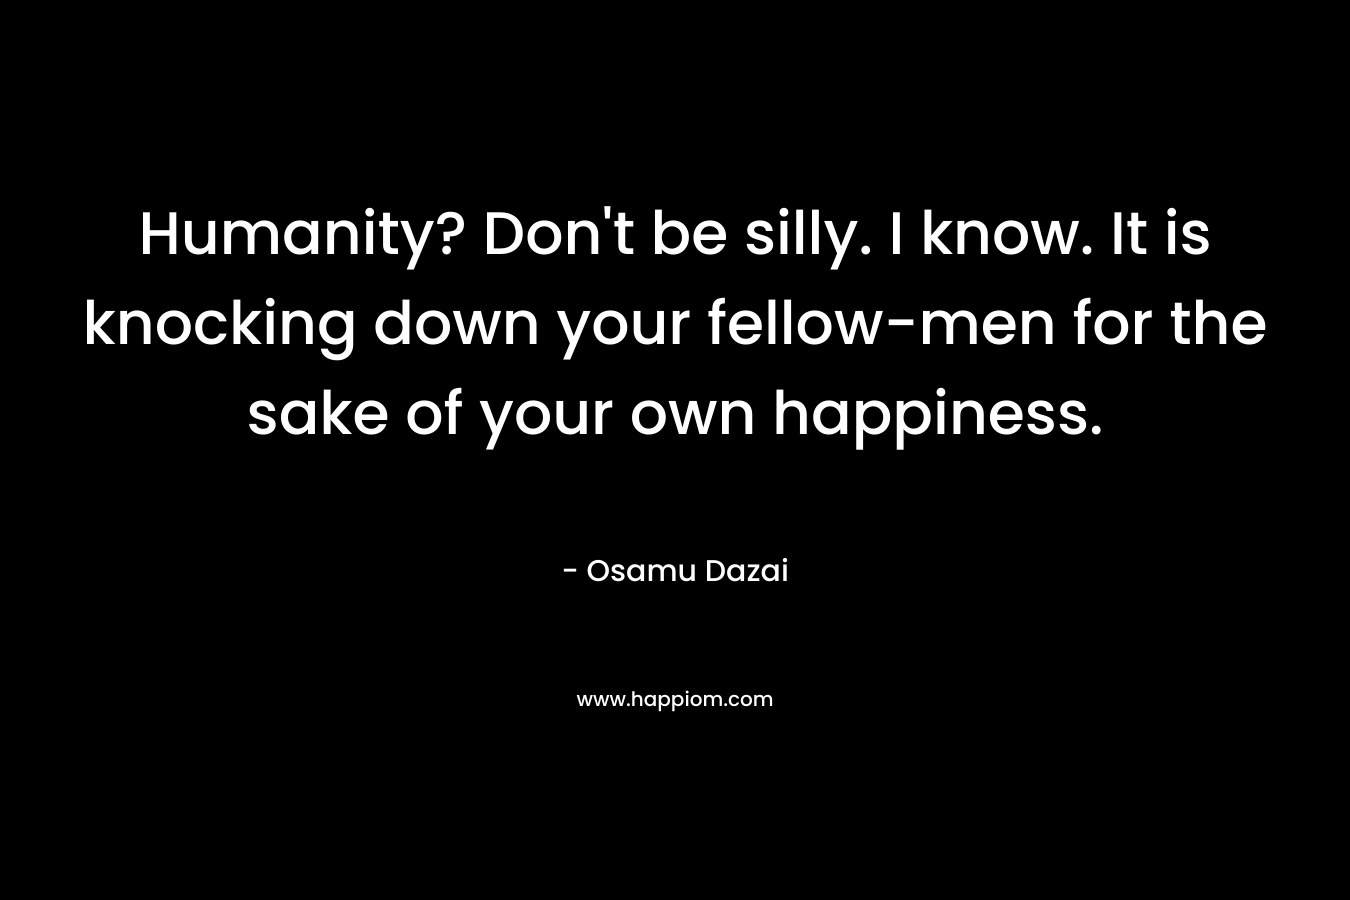 Humanity? Don’t be silly. I know. It is knocking down your fellow-men for the sake of your own happiness. – Osamu Dazai